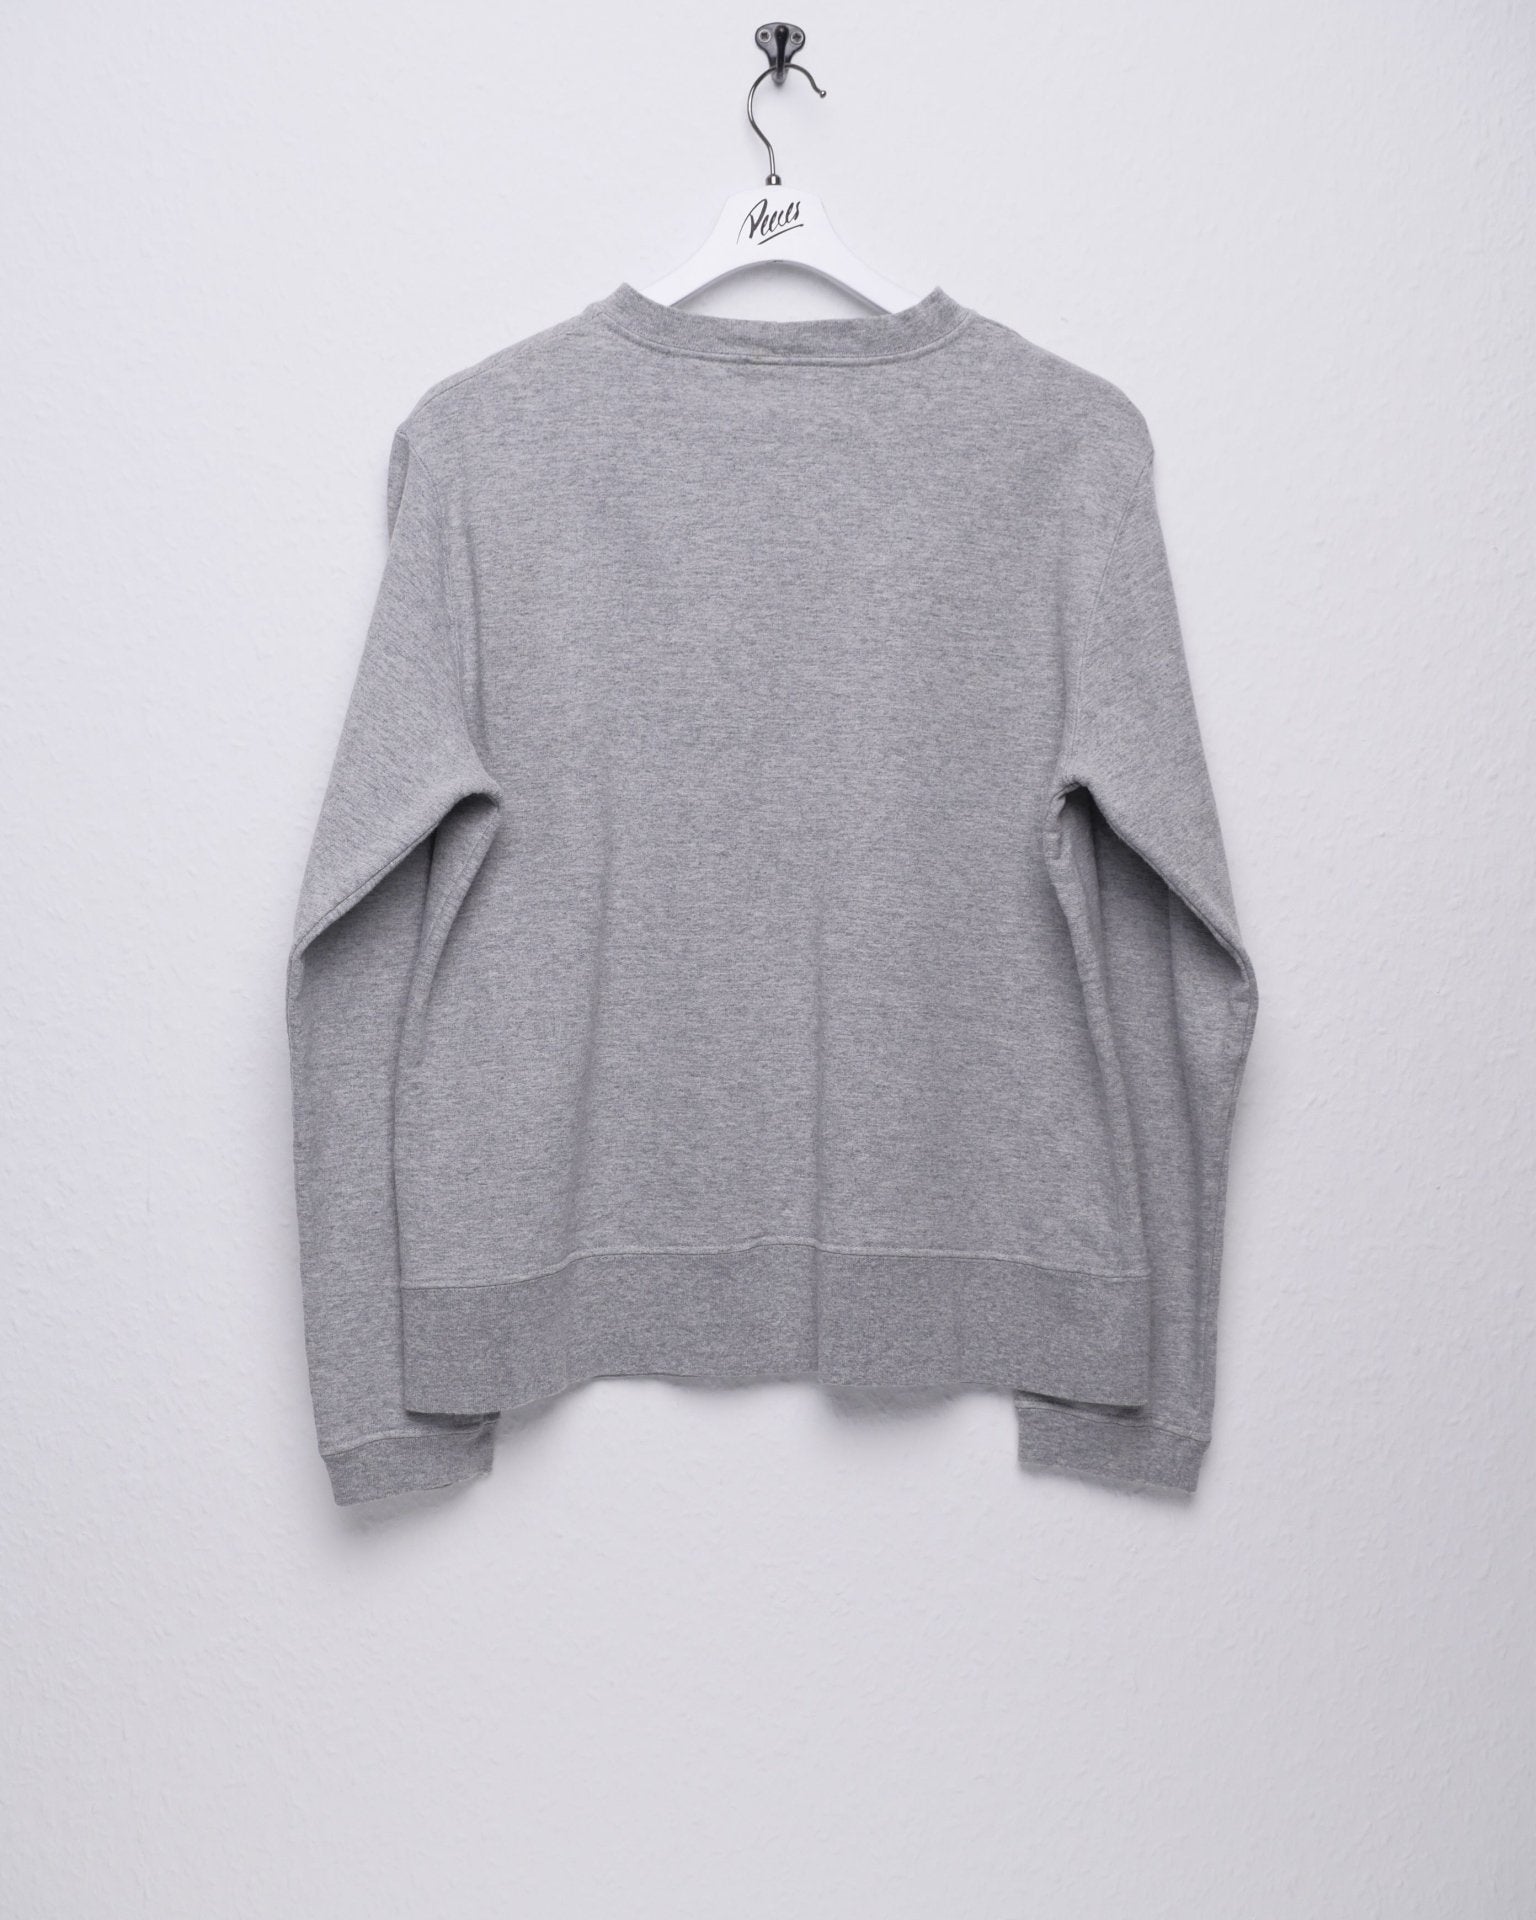 dkny printed Spellout grey Sweater - Peeces